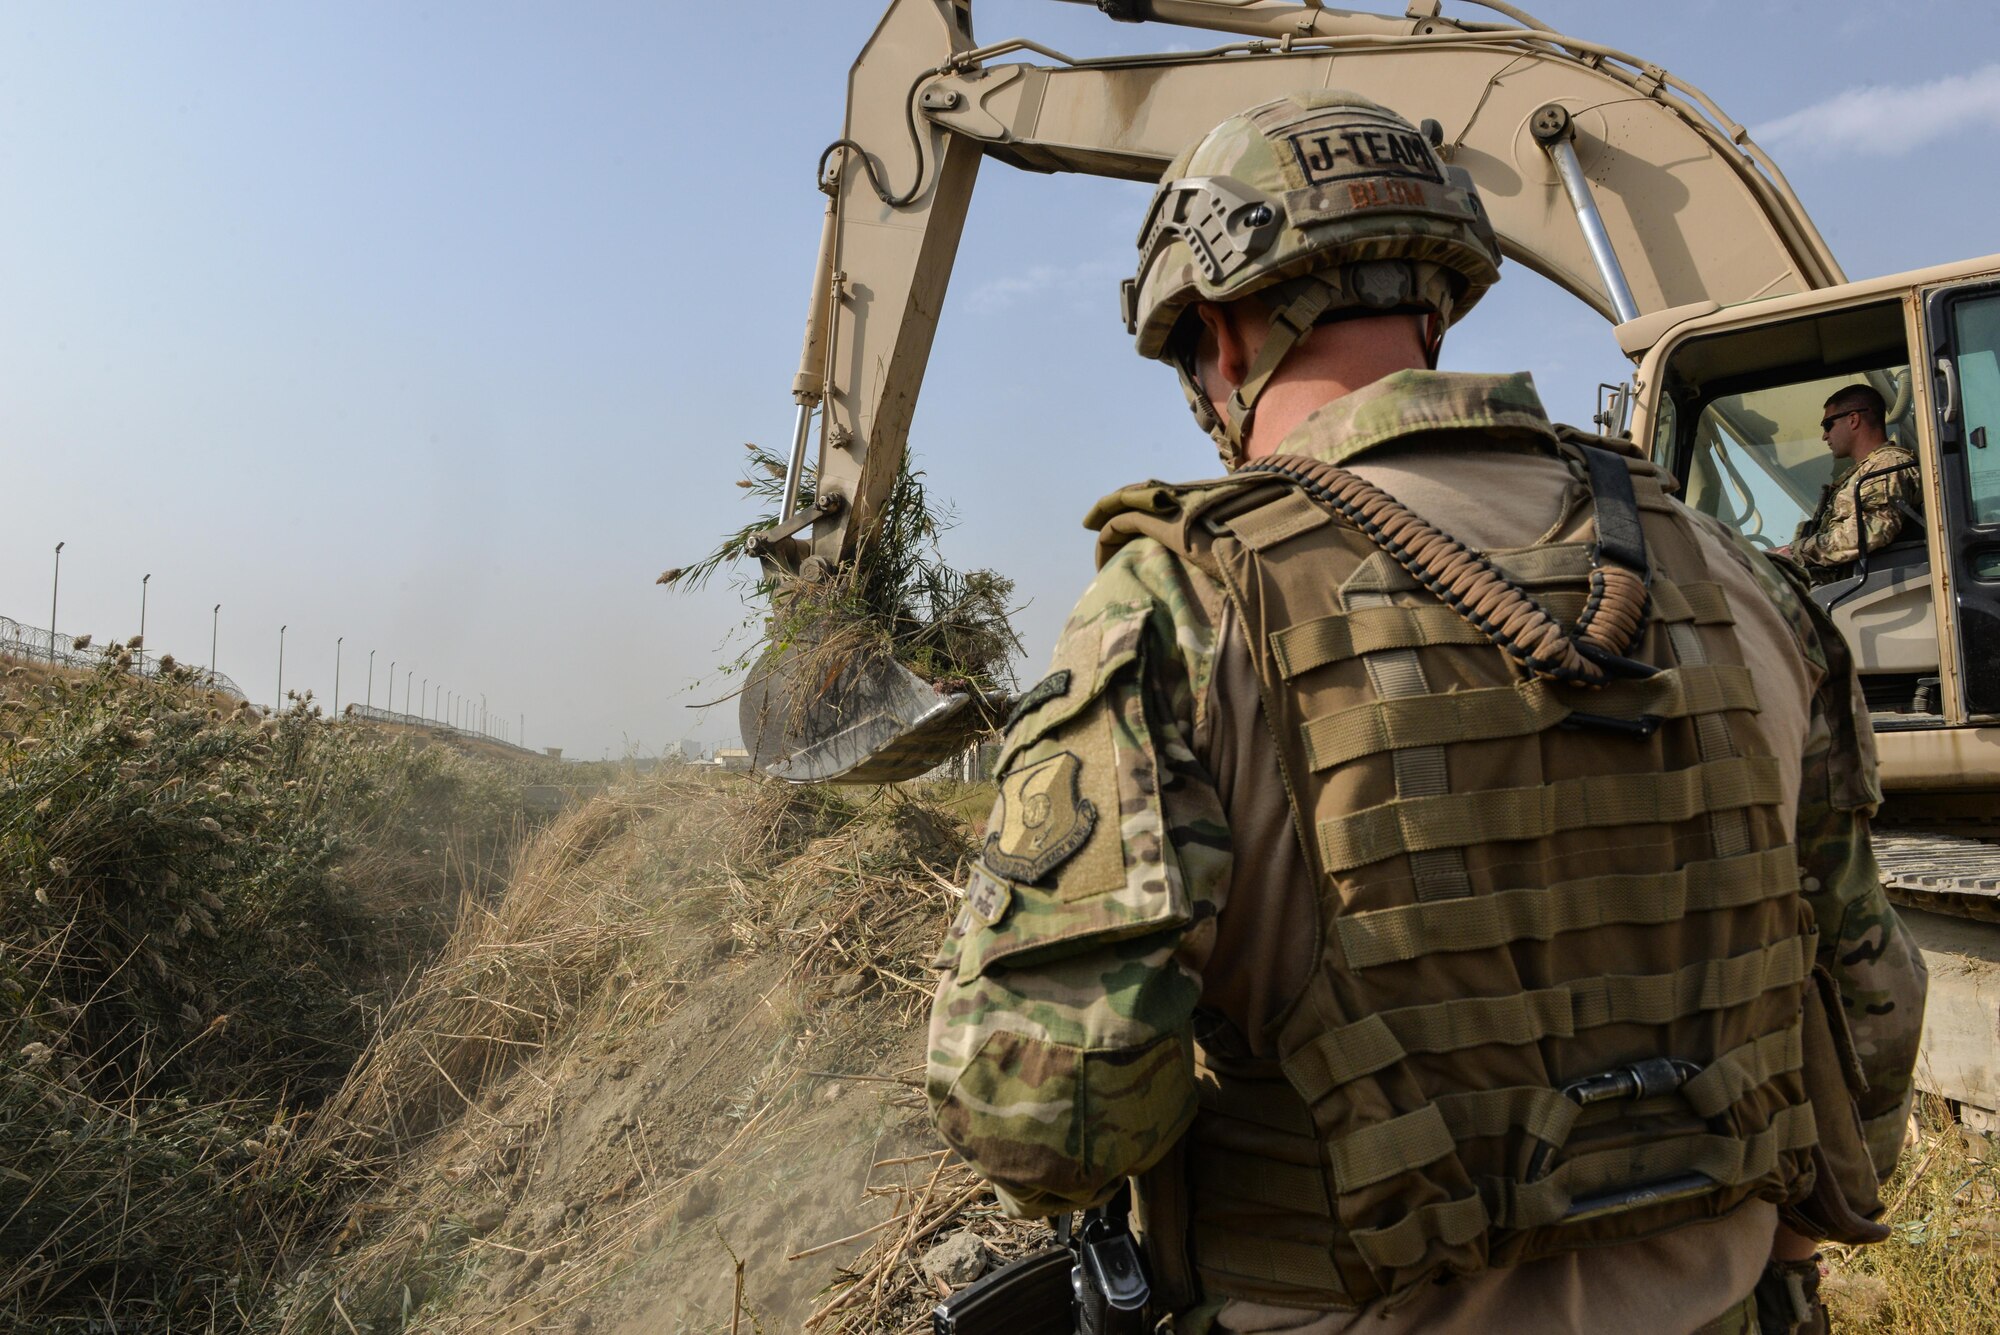 Capt. Erik Blum watches as Master Sgt. Thomas Ryan removes reeds from a 7-meter deep trench at Kabul Air Wing, Afghanistan, Oct. 6, 2016. The Train, Advise, Assist Command-Air (TAAC-Air) civil engineer advisors worked to clear a field of reeds in excess of 15-feet tall. The height of the vegetation had become a force protection concern for security forces personnel manning an entry control point who couldn't properly see past the field. (U.S. Air Force photo by Tech. Sgt. Christopher Holmes)